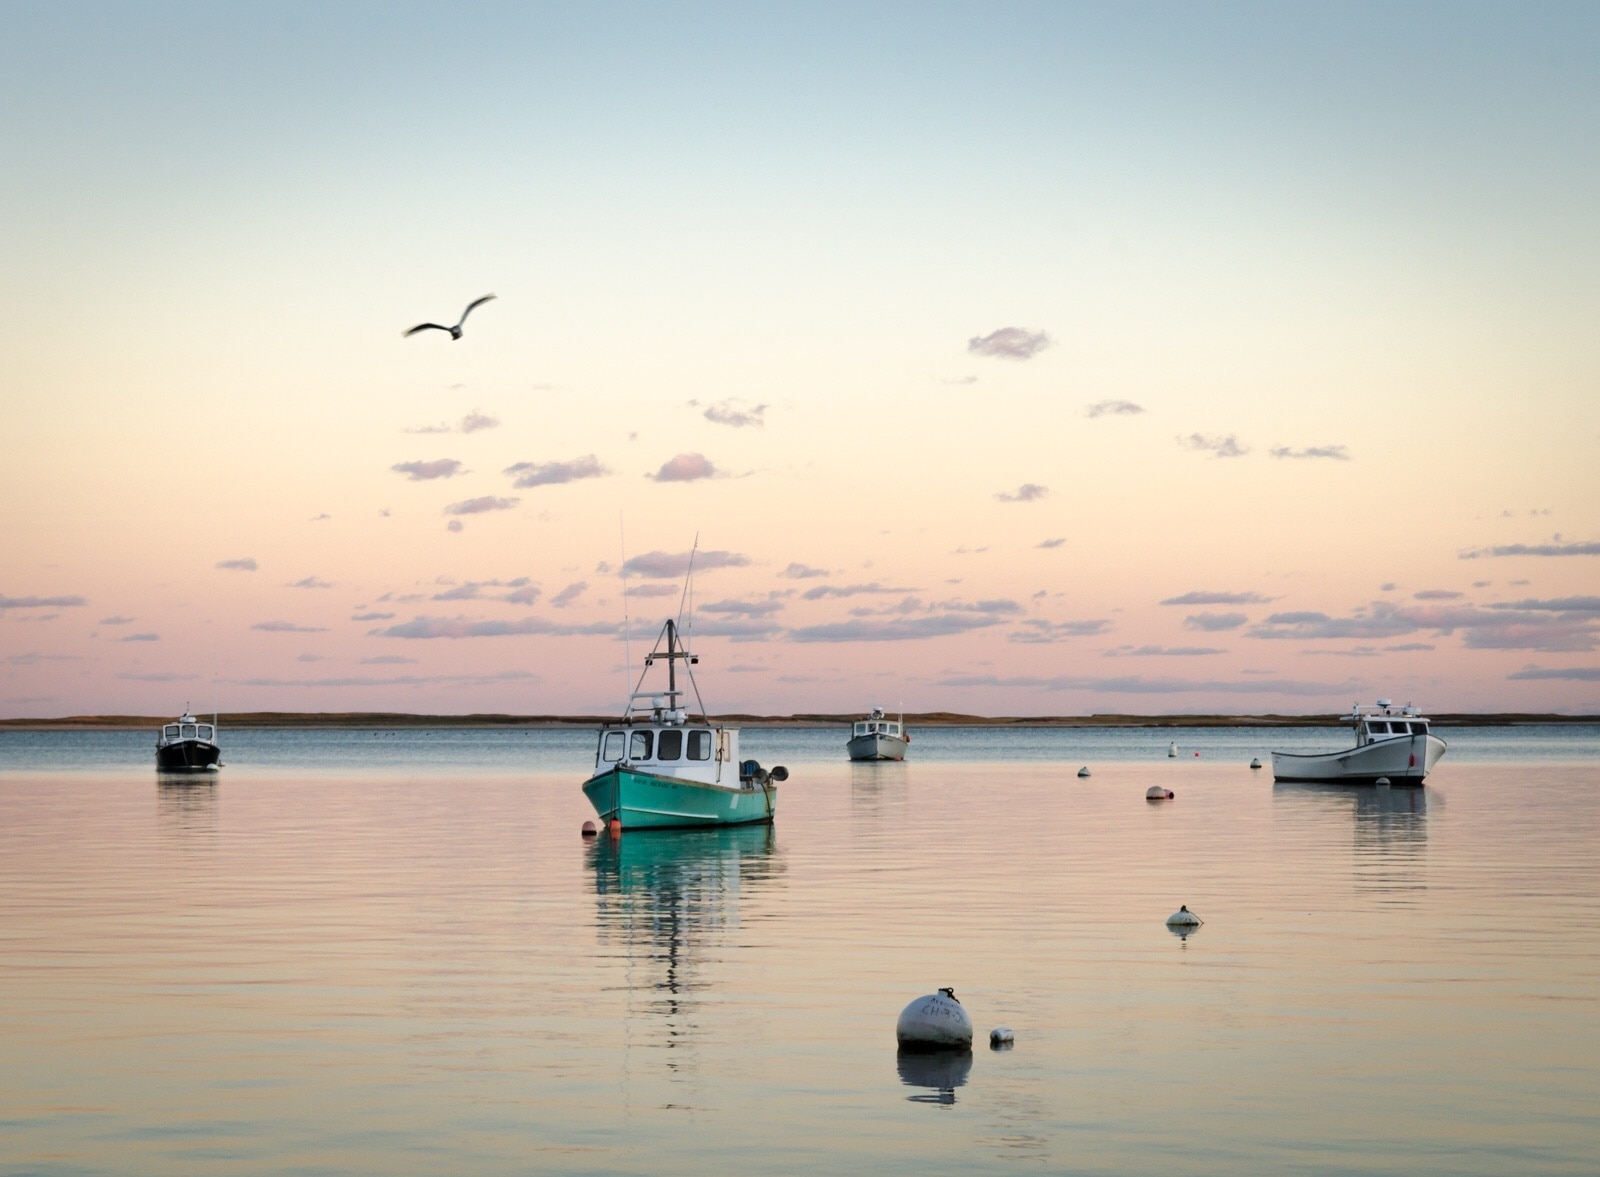 Enjoy the view, watch the fishing boats come in and unload their catch, and pick up fresh fish or seafood to take home for dinner at the market.